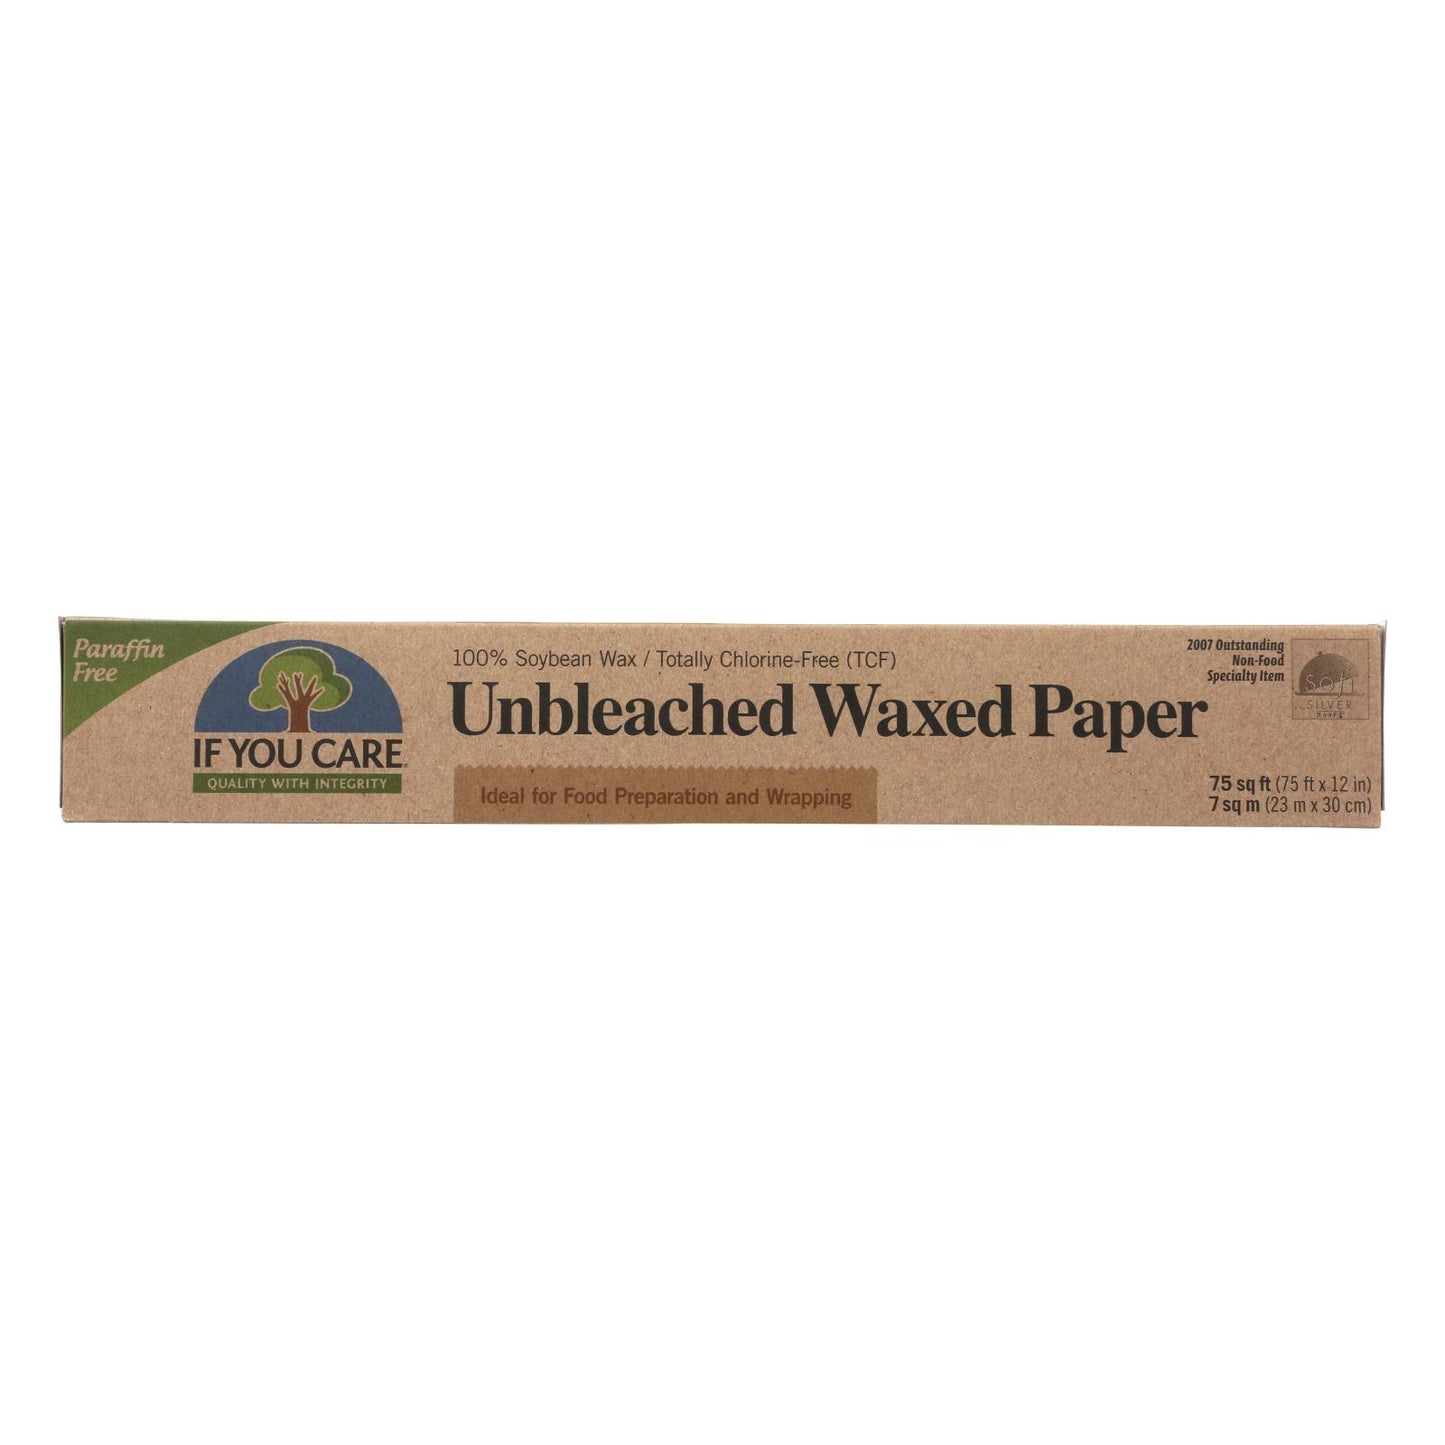 If You Care Waxed Paper - All Natural - 100 Percent Unbleached - 75 Sq Ft